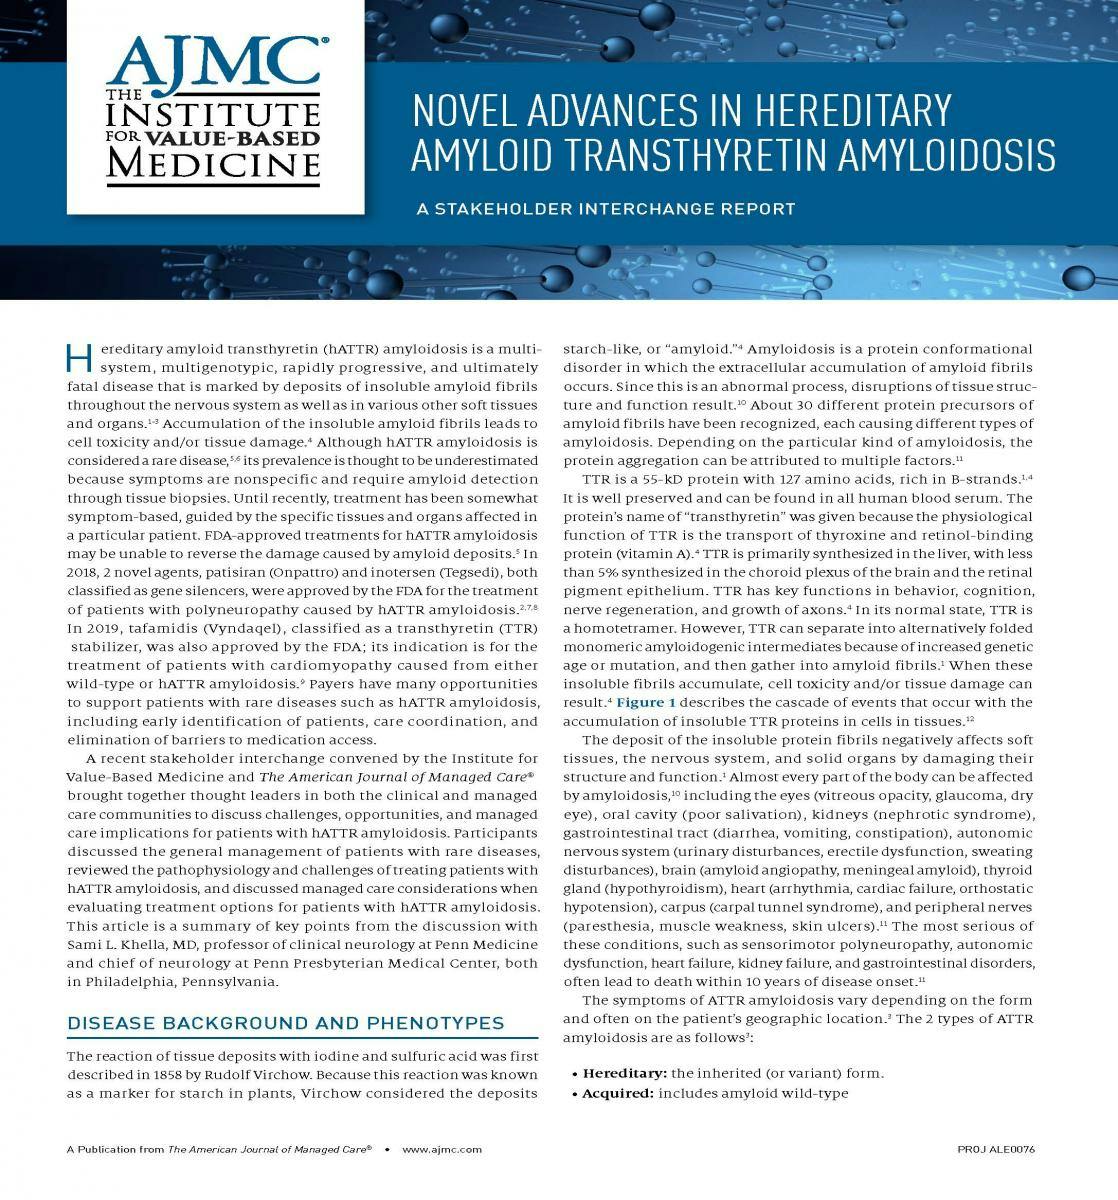 Novel Advances in Hereditary Amyloid Transthyretin Amyloidosis: A Stakeholder Interchange Report